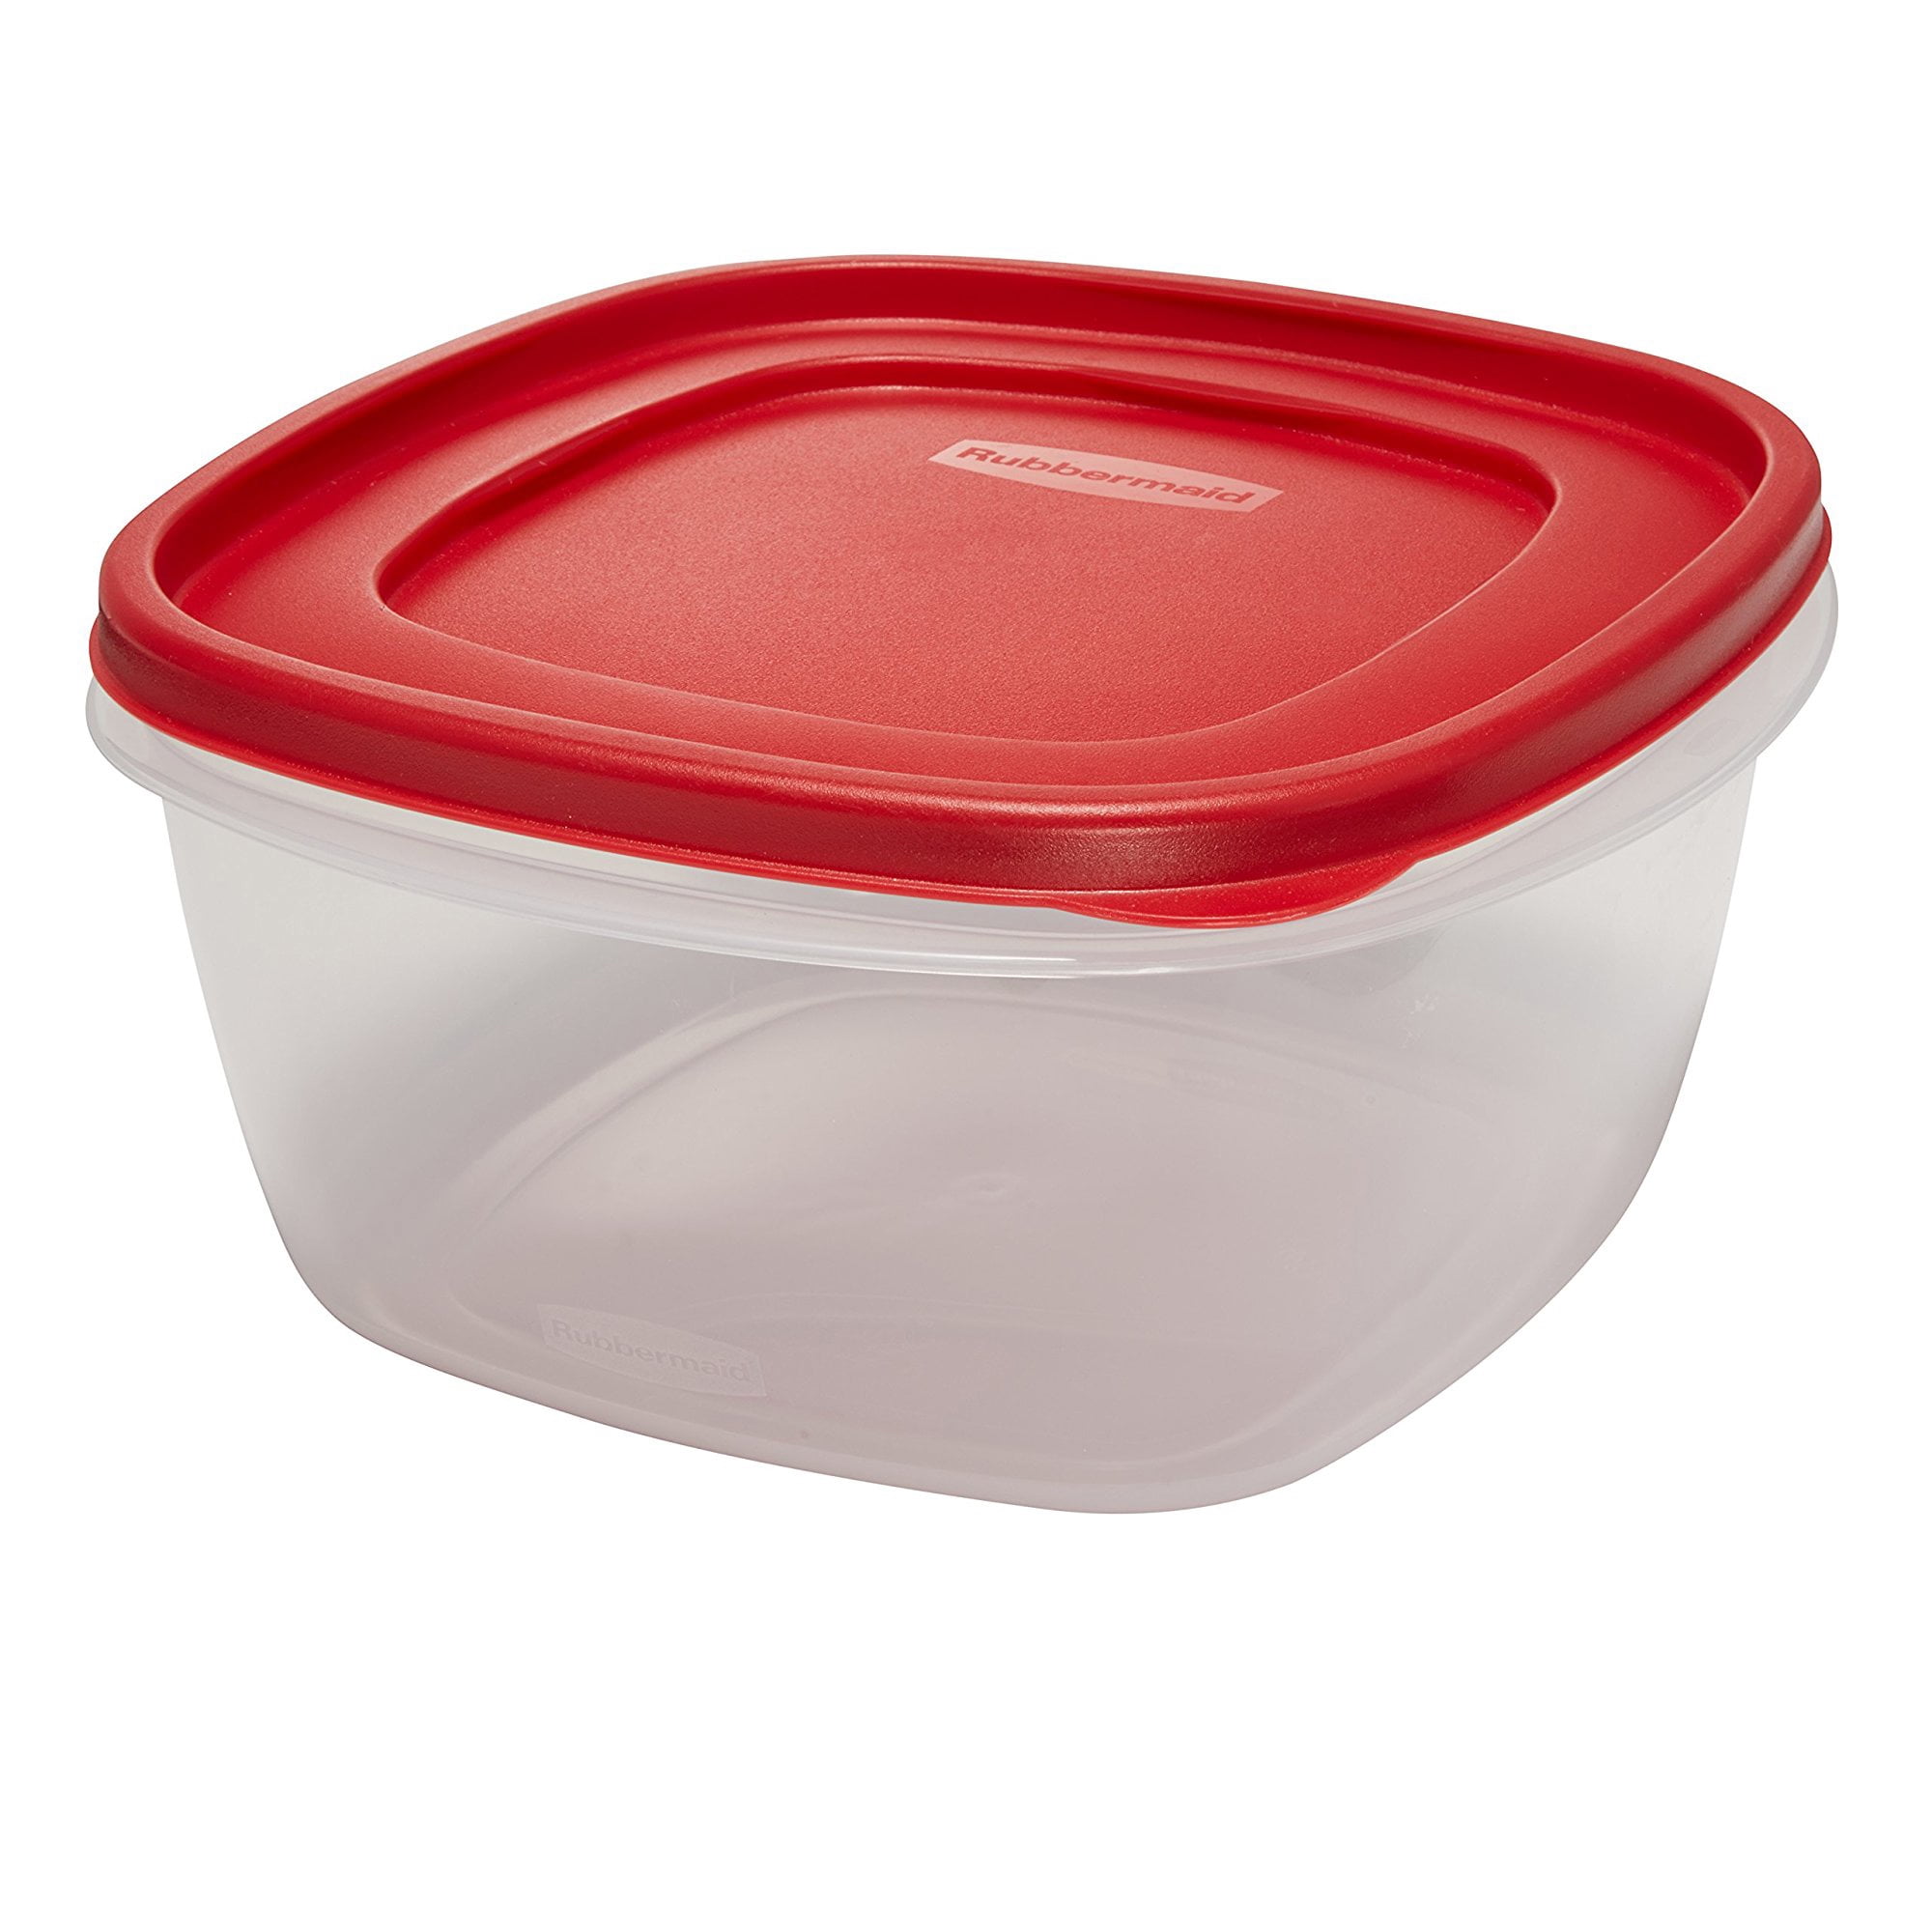 Rubbermaid Red REPLACEMENT LID Only for Food Storage 7J58 Fits 4”